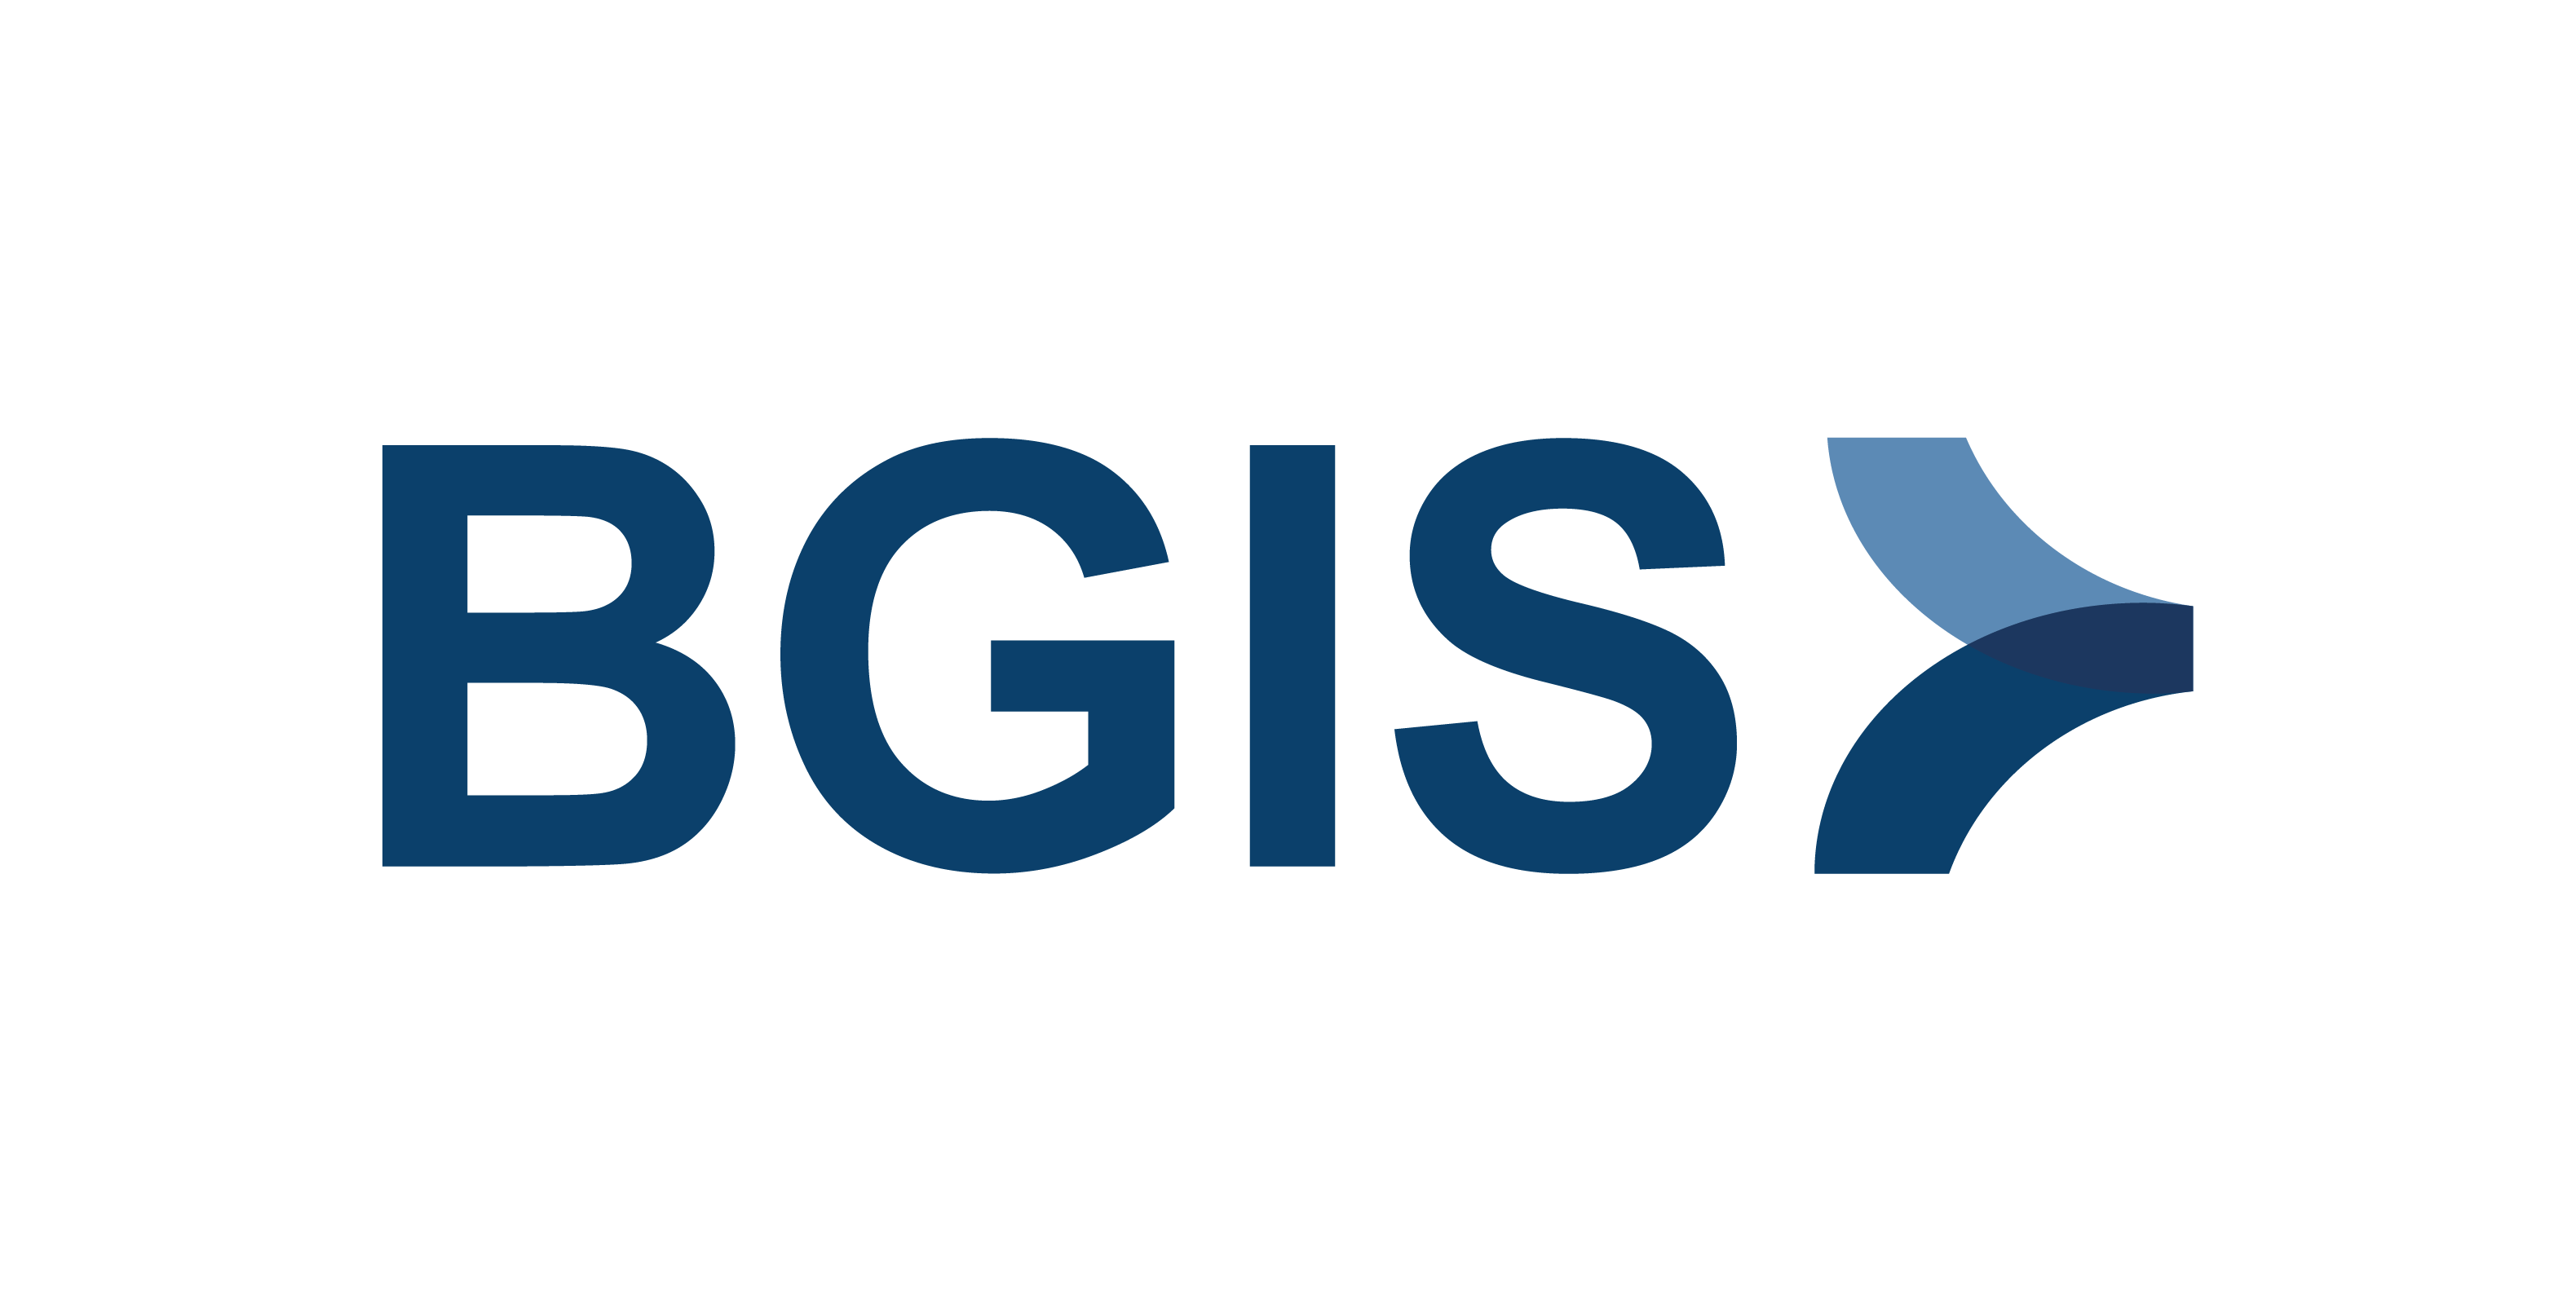 BGIS named as one of